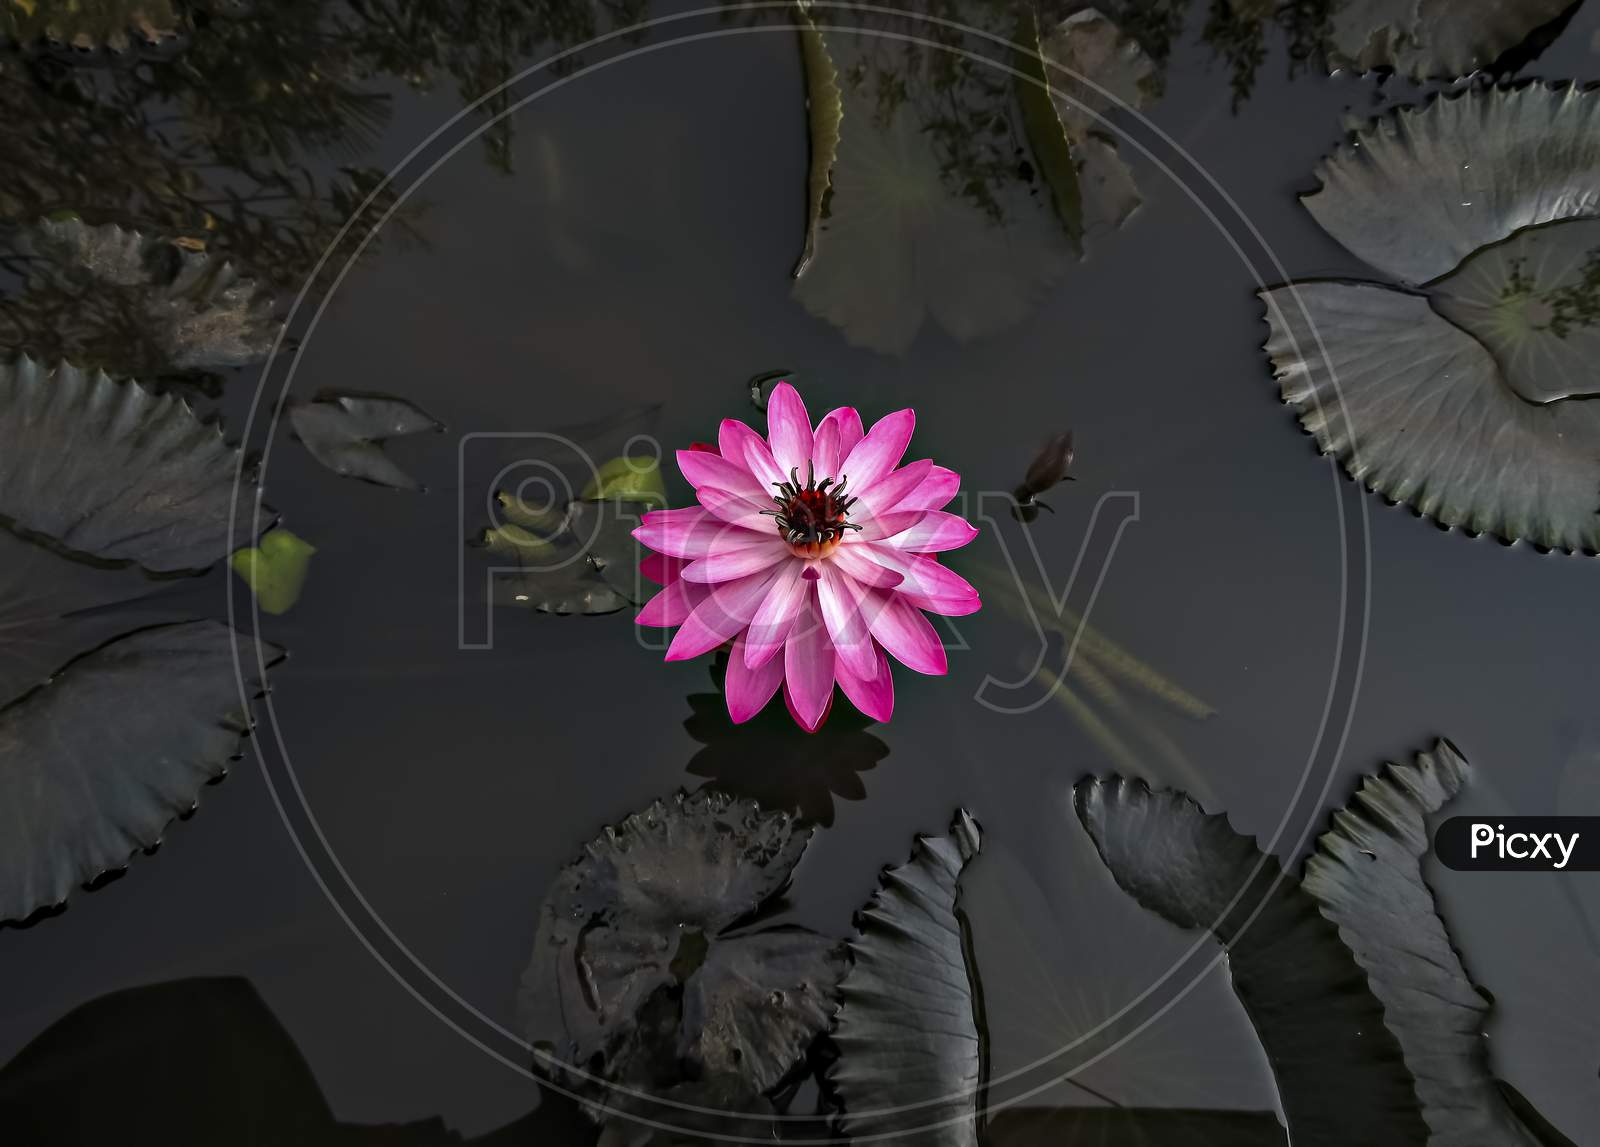 Isolated, Close Up Image Of A Beautiful Dark Pink Lotus Flower With Leaves In Water.